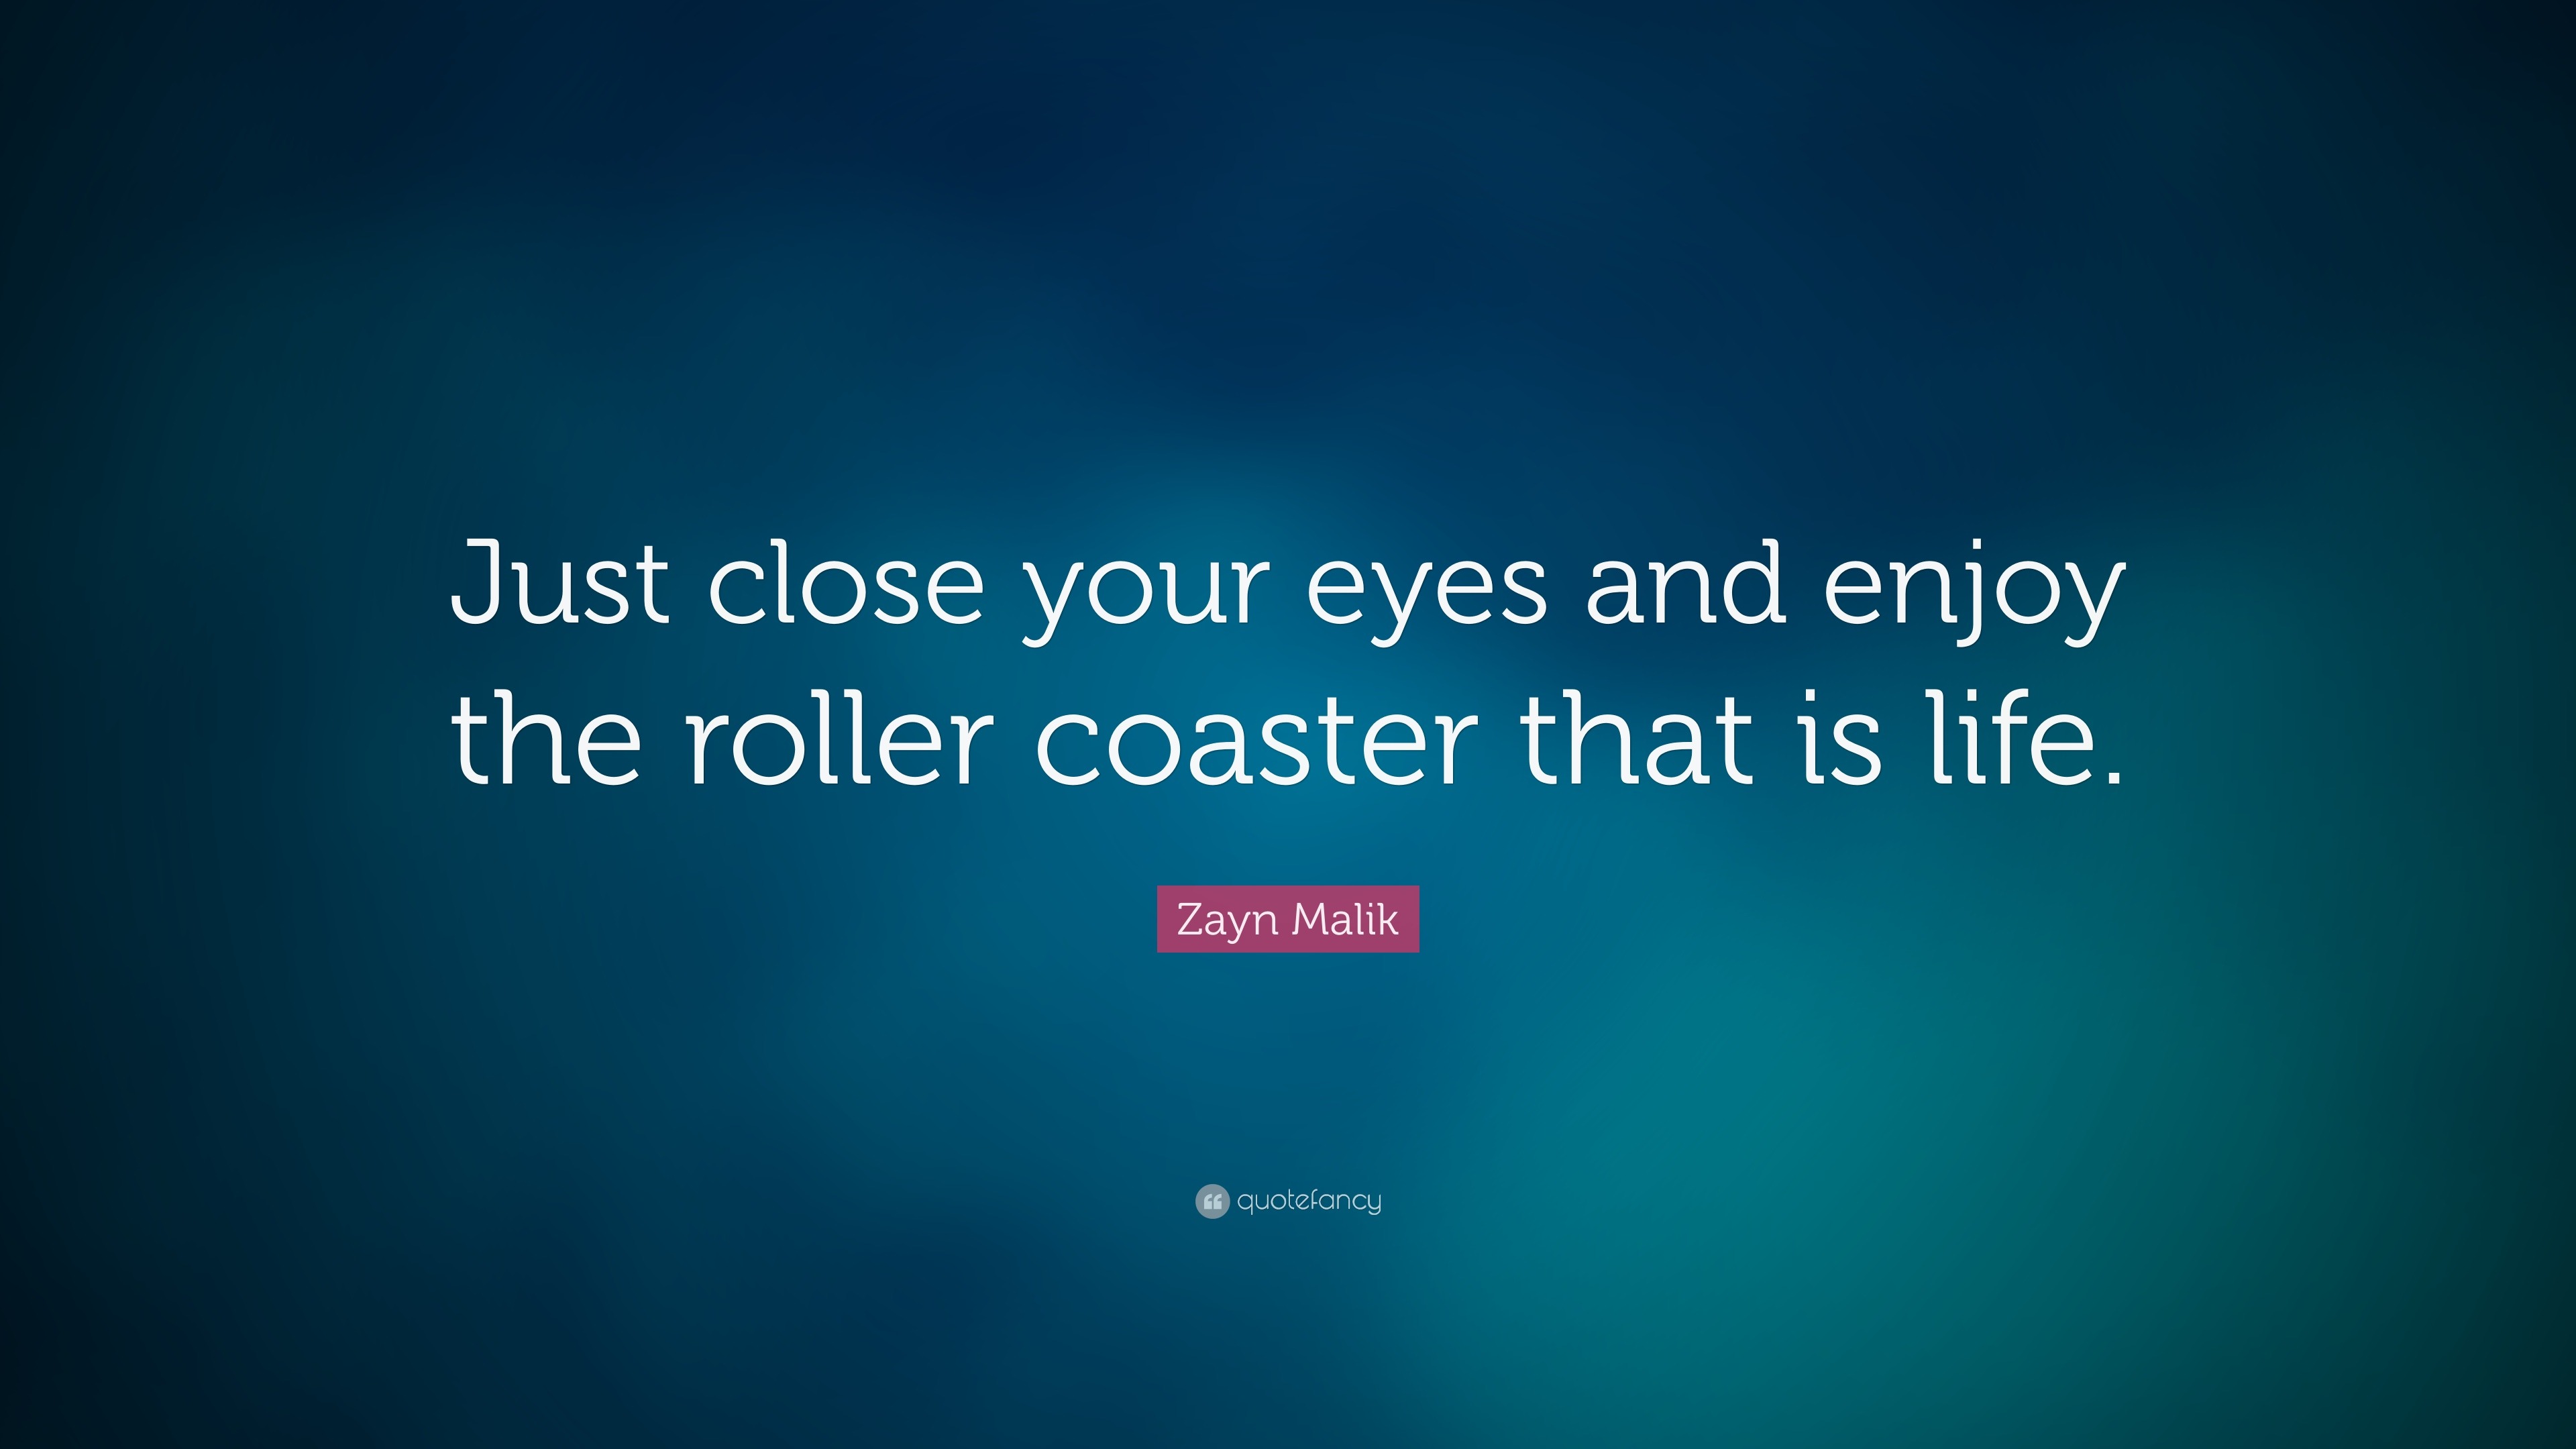 Zayn Malik Quote: “Just close your eyes and enjoy the roller coaster ...